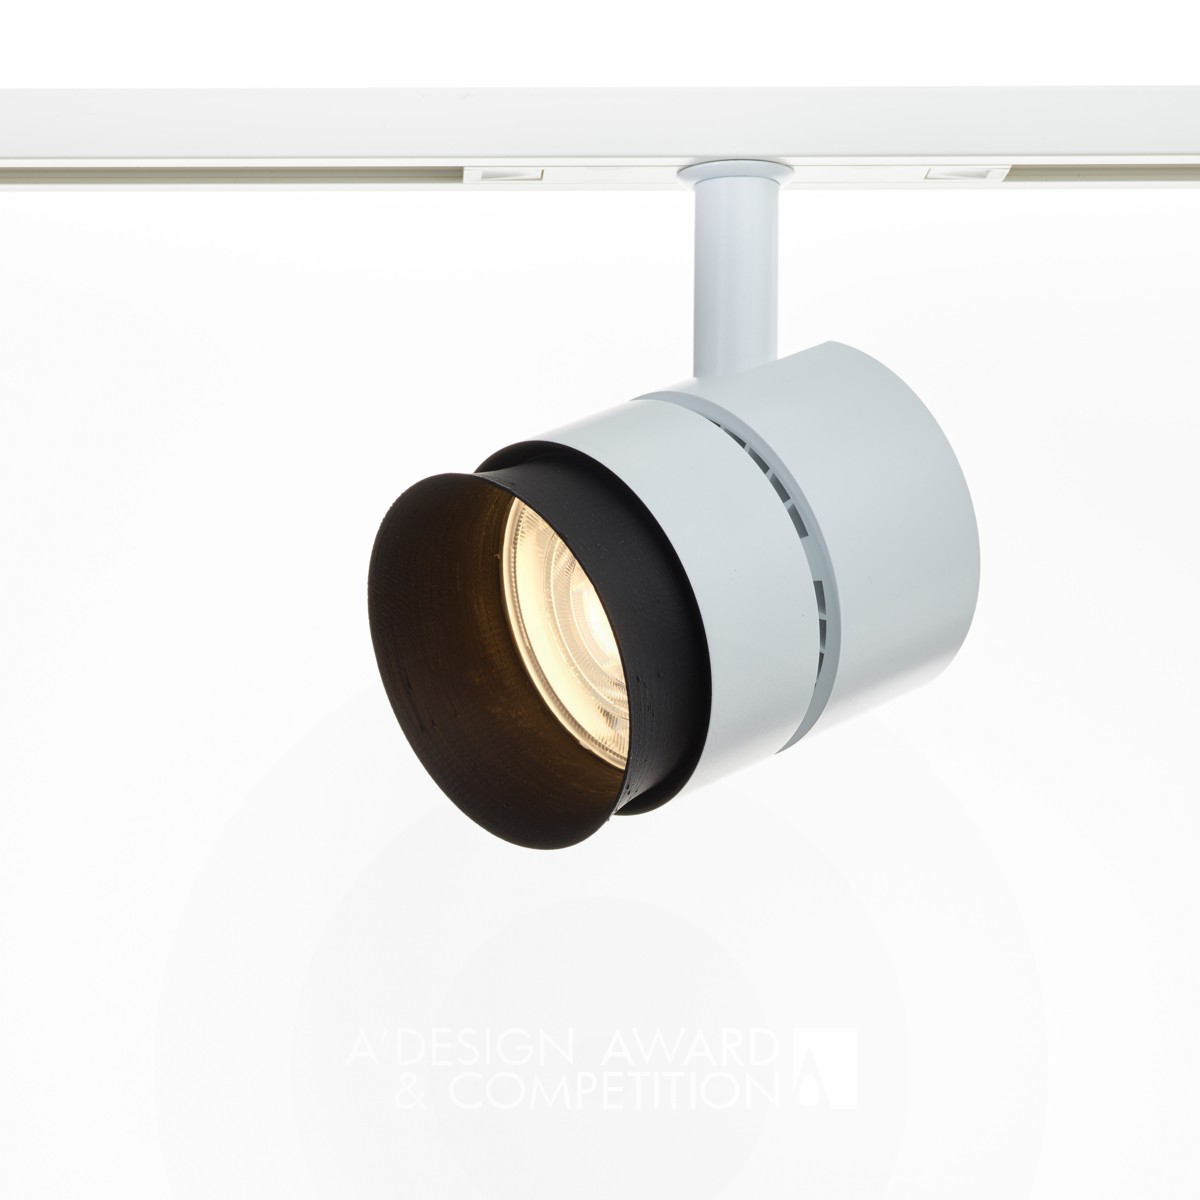 Stratas.NV 80 low voltage LED track light with XICATO  by Christian Schneider-Moll